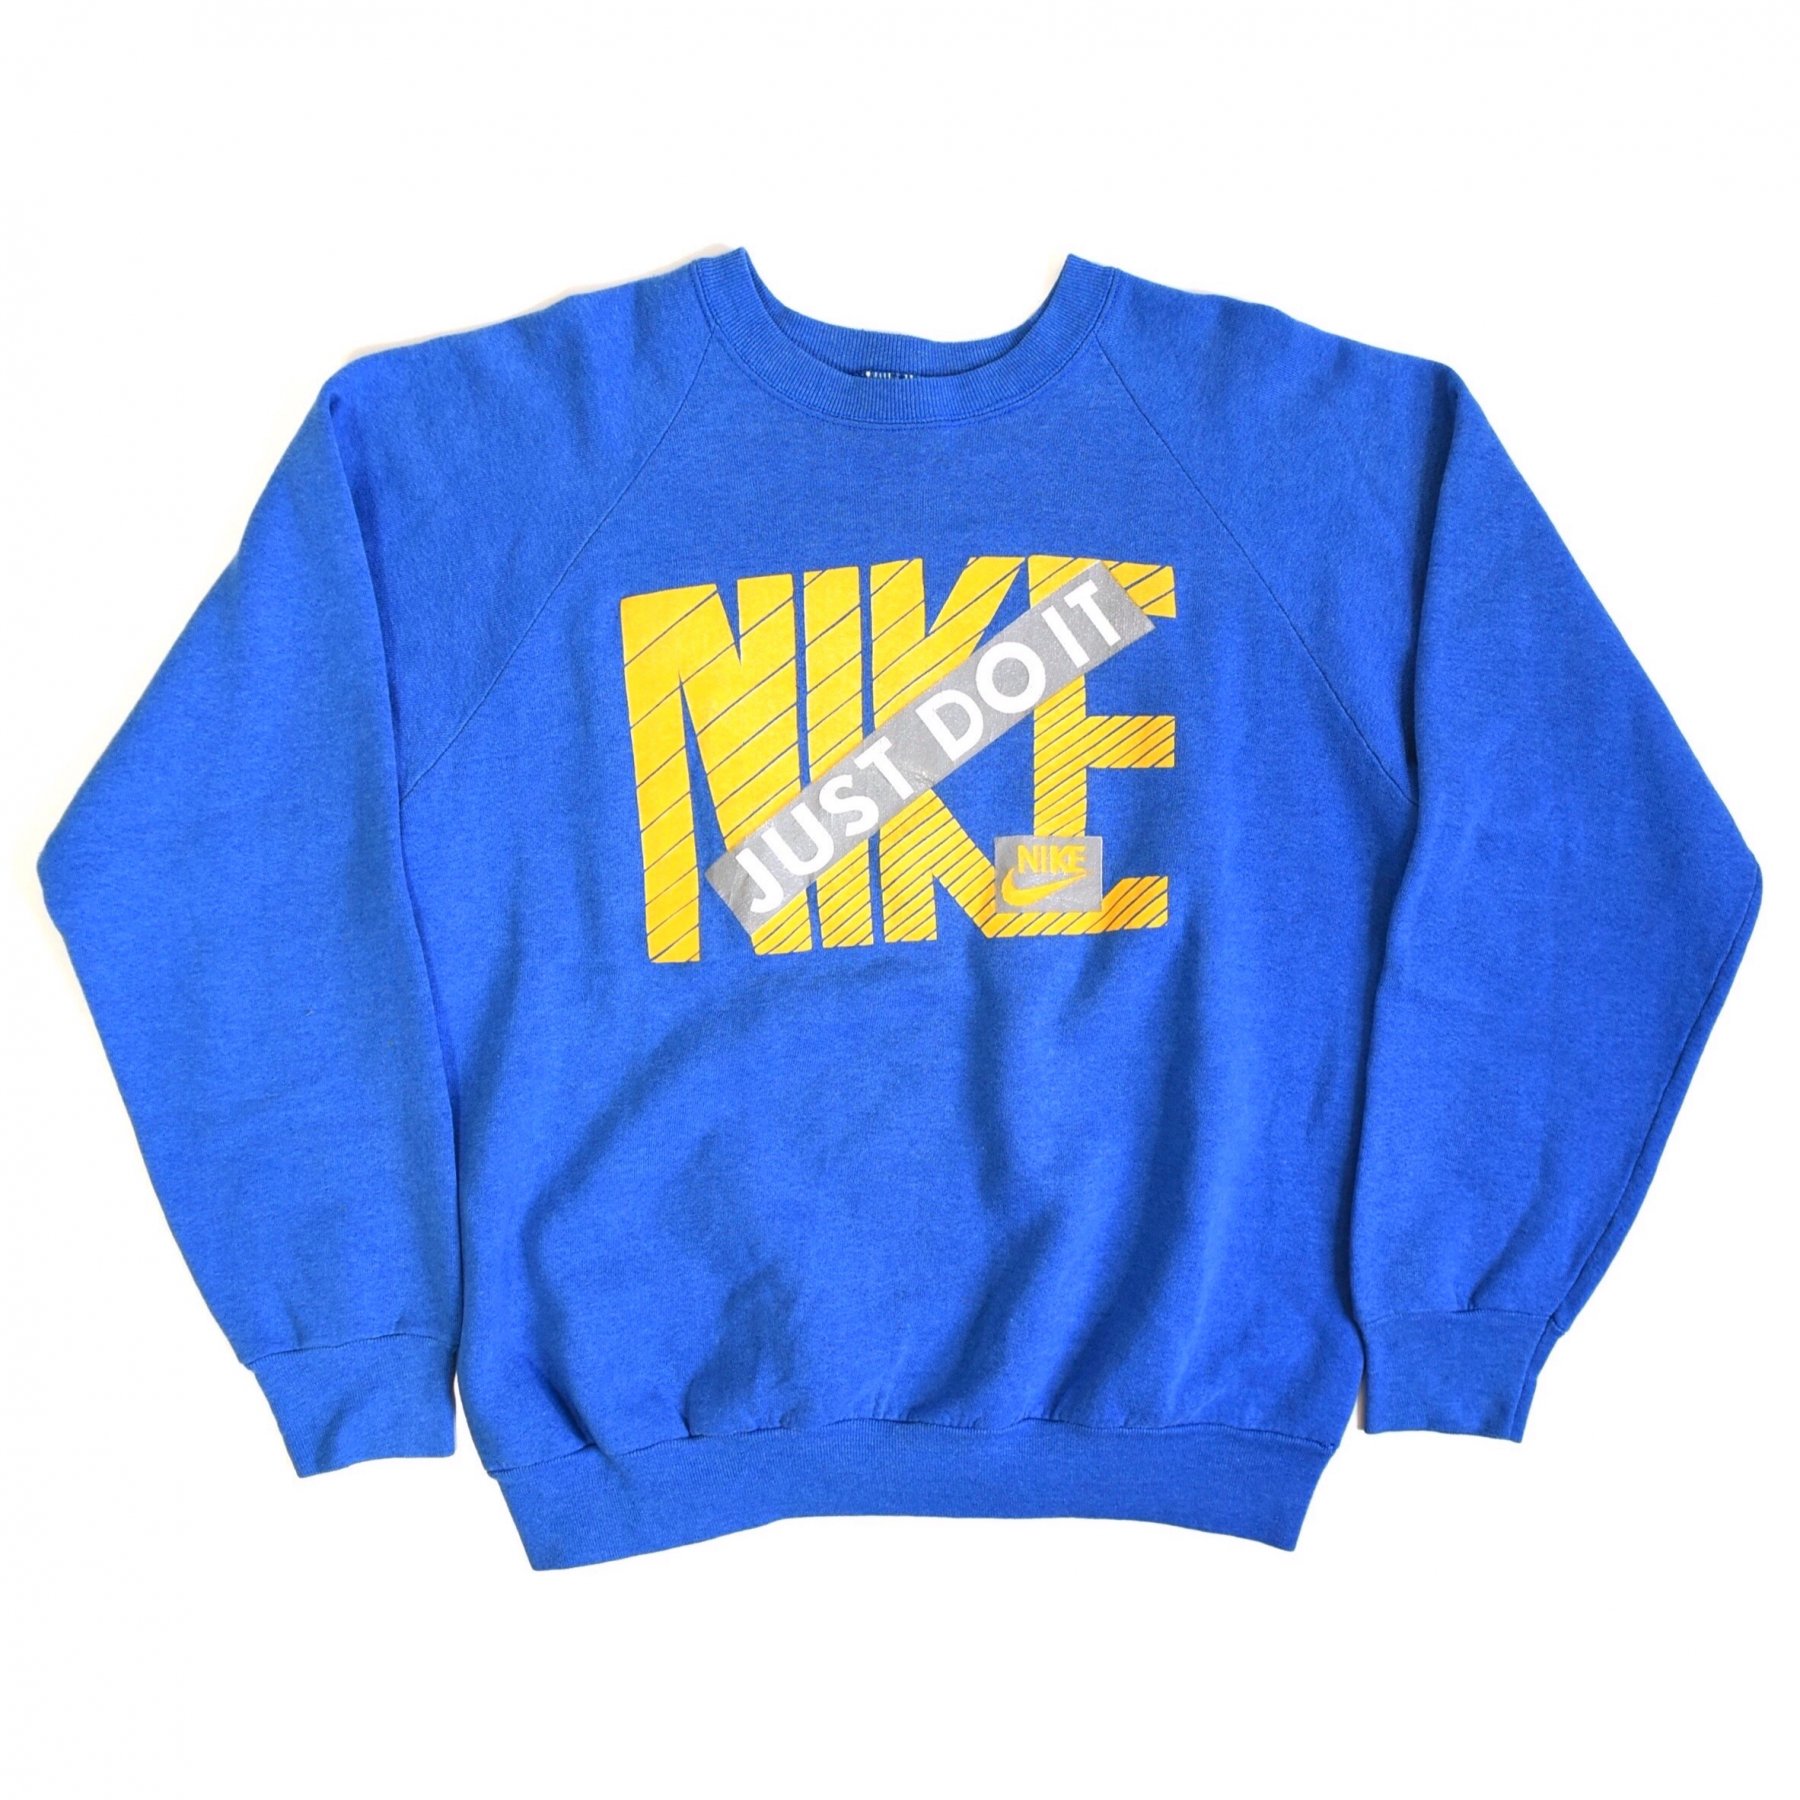 1980-90s NIKEFRUIT OF THE ROOM Sweat shirt L MADE IN USA Blue